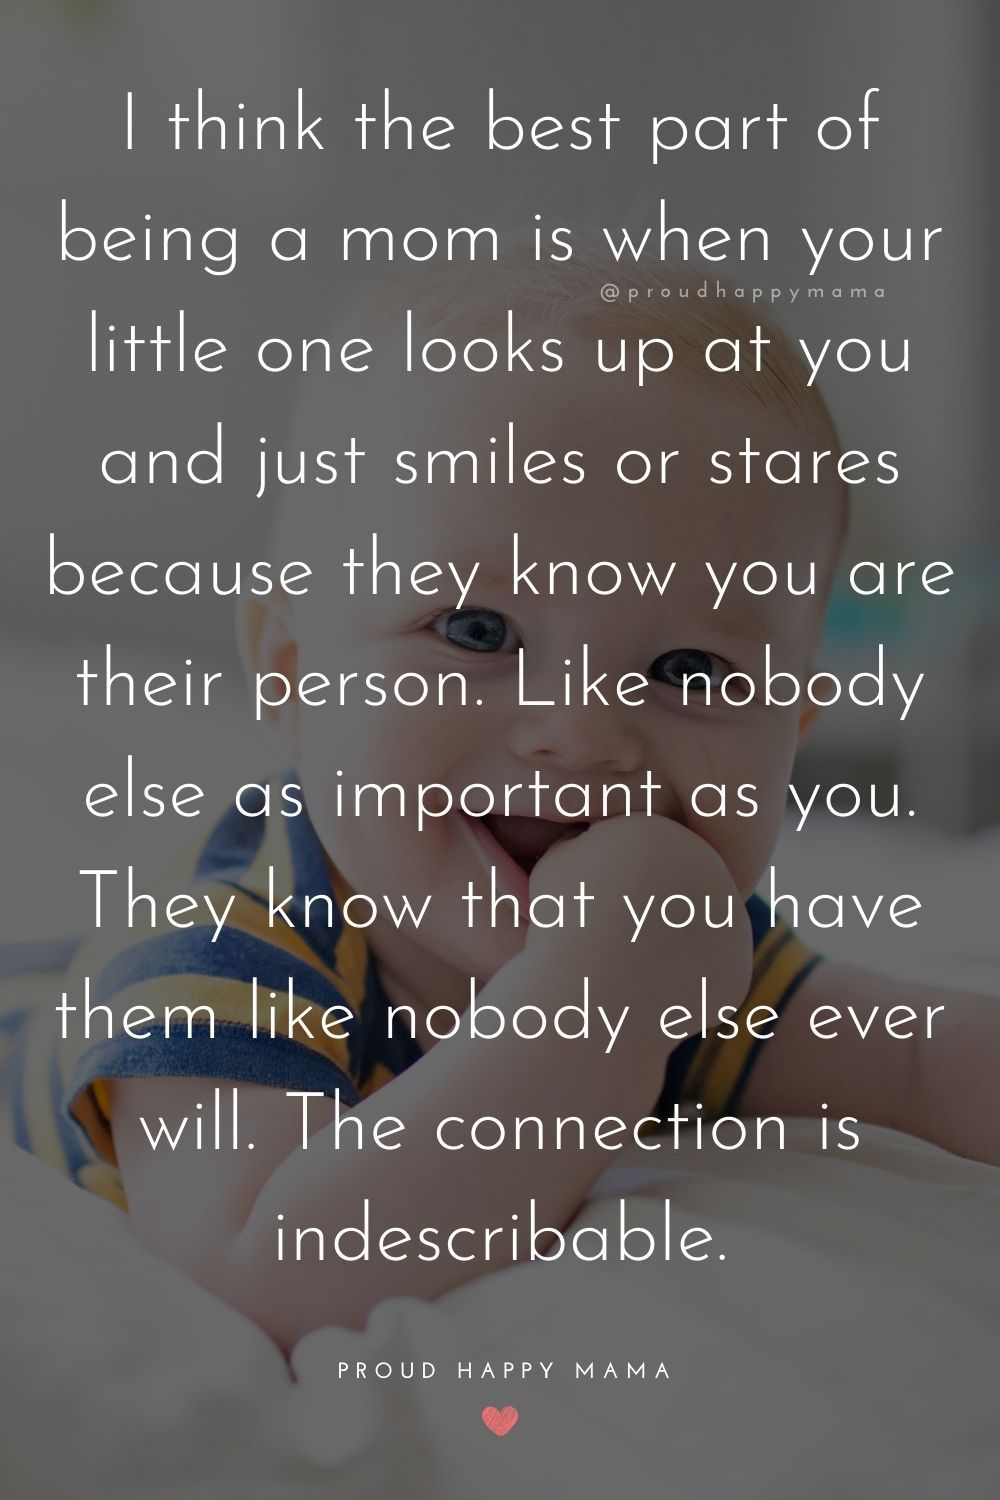 Baby Smile Quotes - I think the best part of being a mom is when your little one looks up at you and just smiles or stares because they know you are their person.